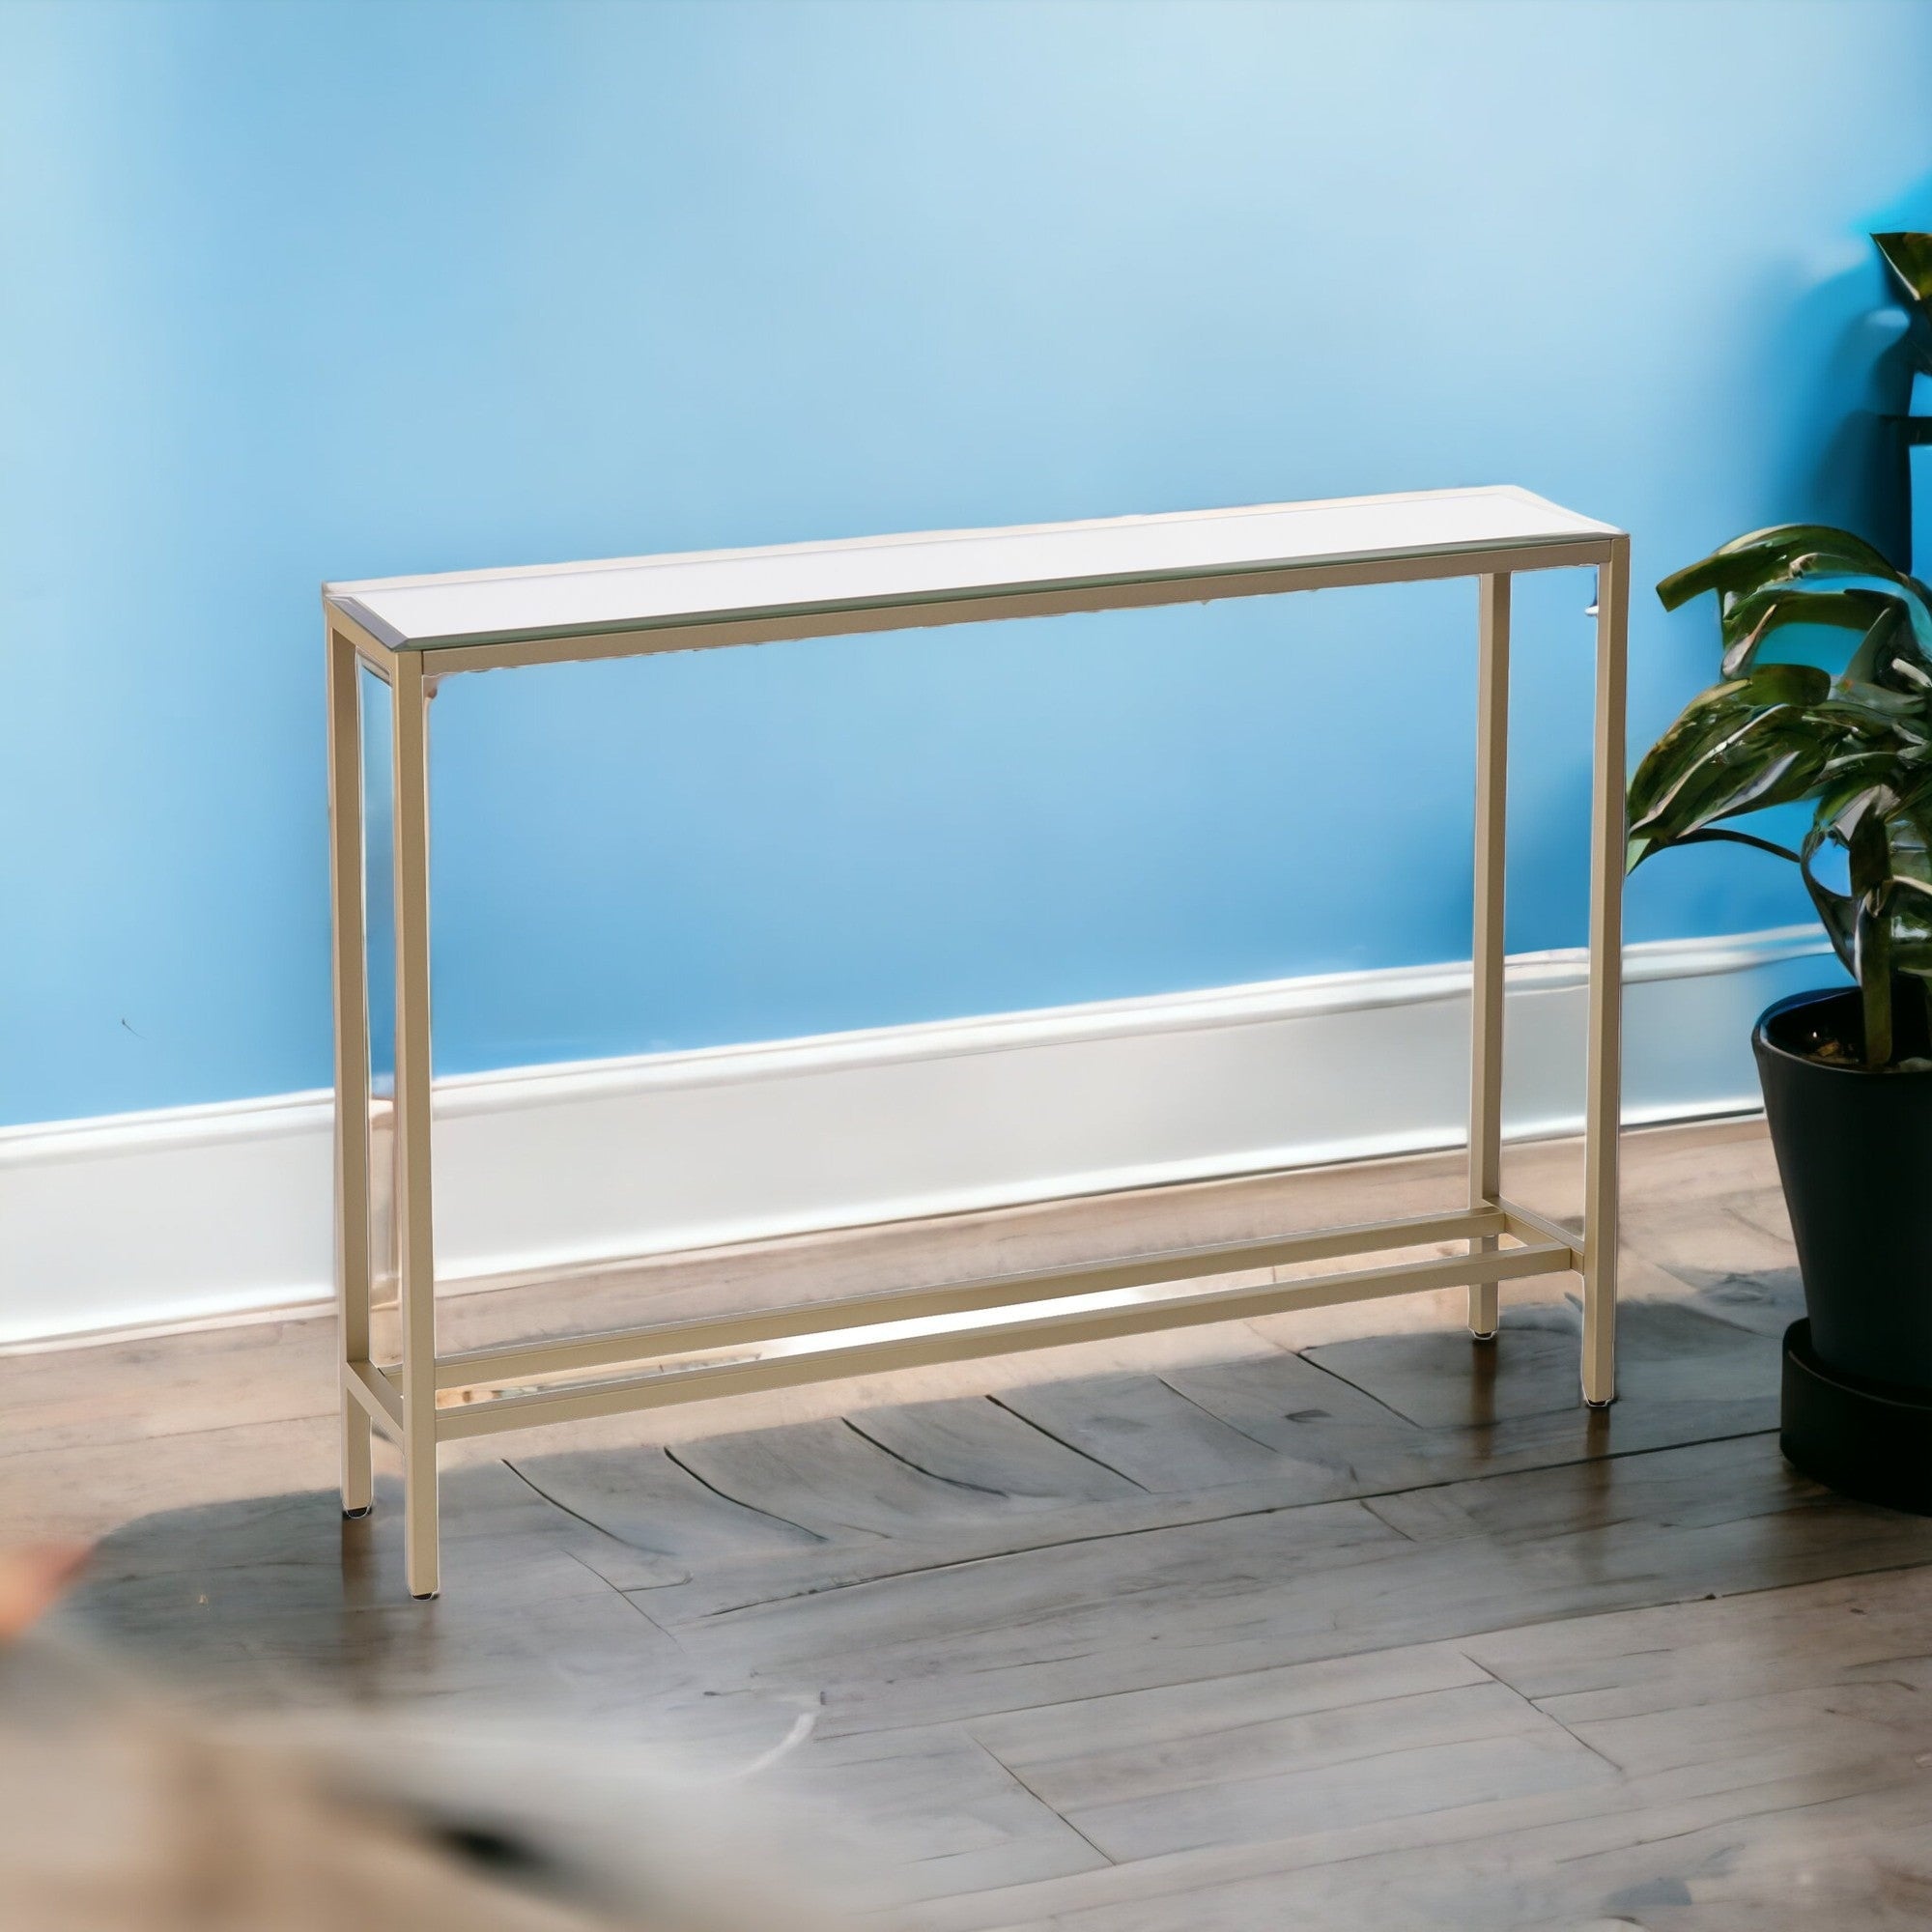 36" Silver and Gold Mirrored Glass Console Table